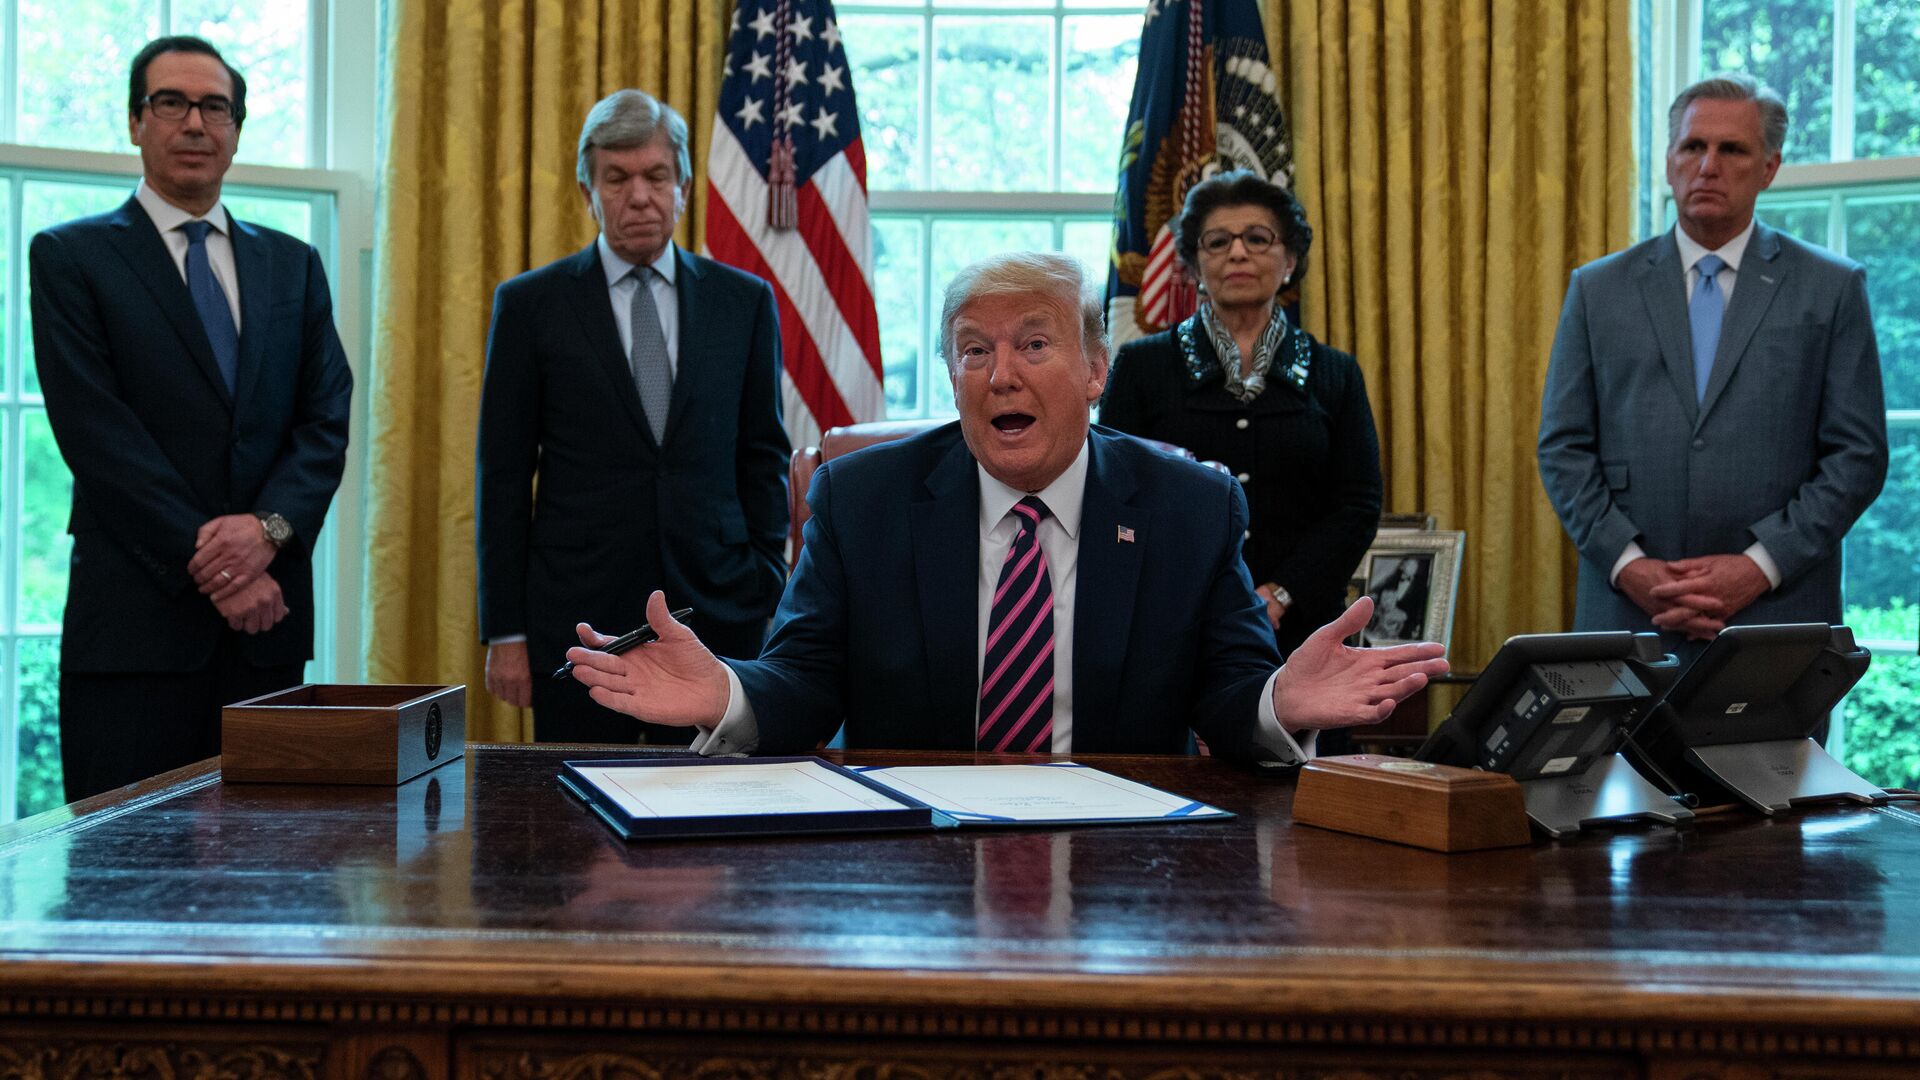 President Donald Trump speaks before signing a coronavirus aid package to direct funds to small businesses, hospitals, and testing, in the Oval Office of the White House, Friday, April 24, 2020, in Washington. From left, Treasury Secretary Steven Mnuchin, Sen. Roy Blunt, R-Mo., Trump, Small Business administrator Jovita Carranza, and House Minority Leader Kevin McCarthy of Calif. (AP Photo/Evan Vucci) - Sputnik International, 1920, 10.02.2022